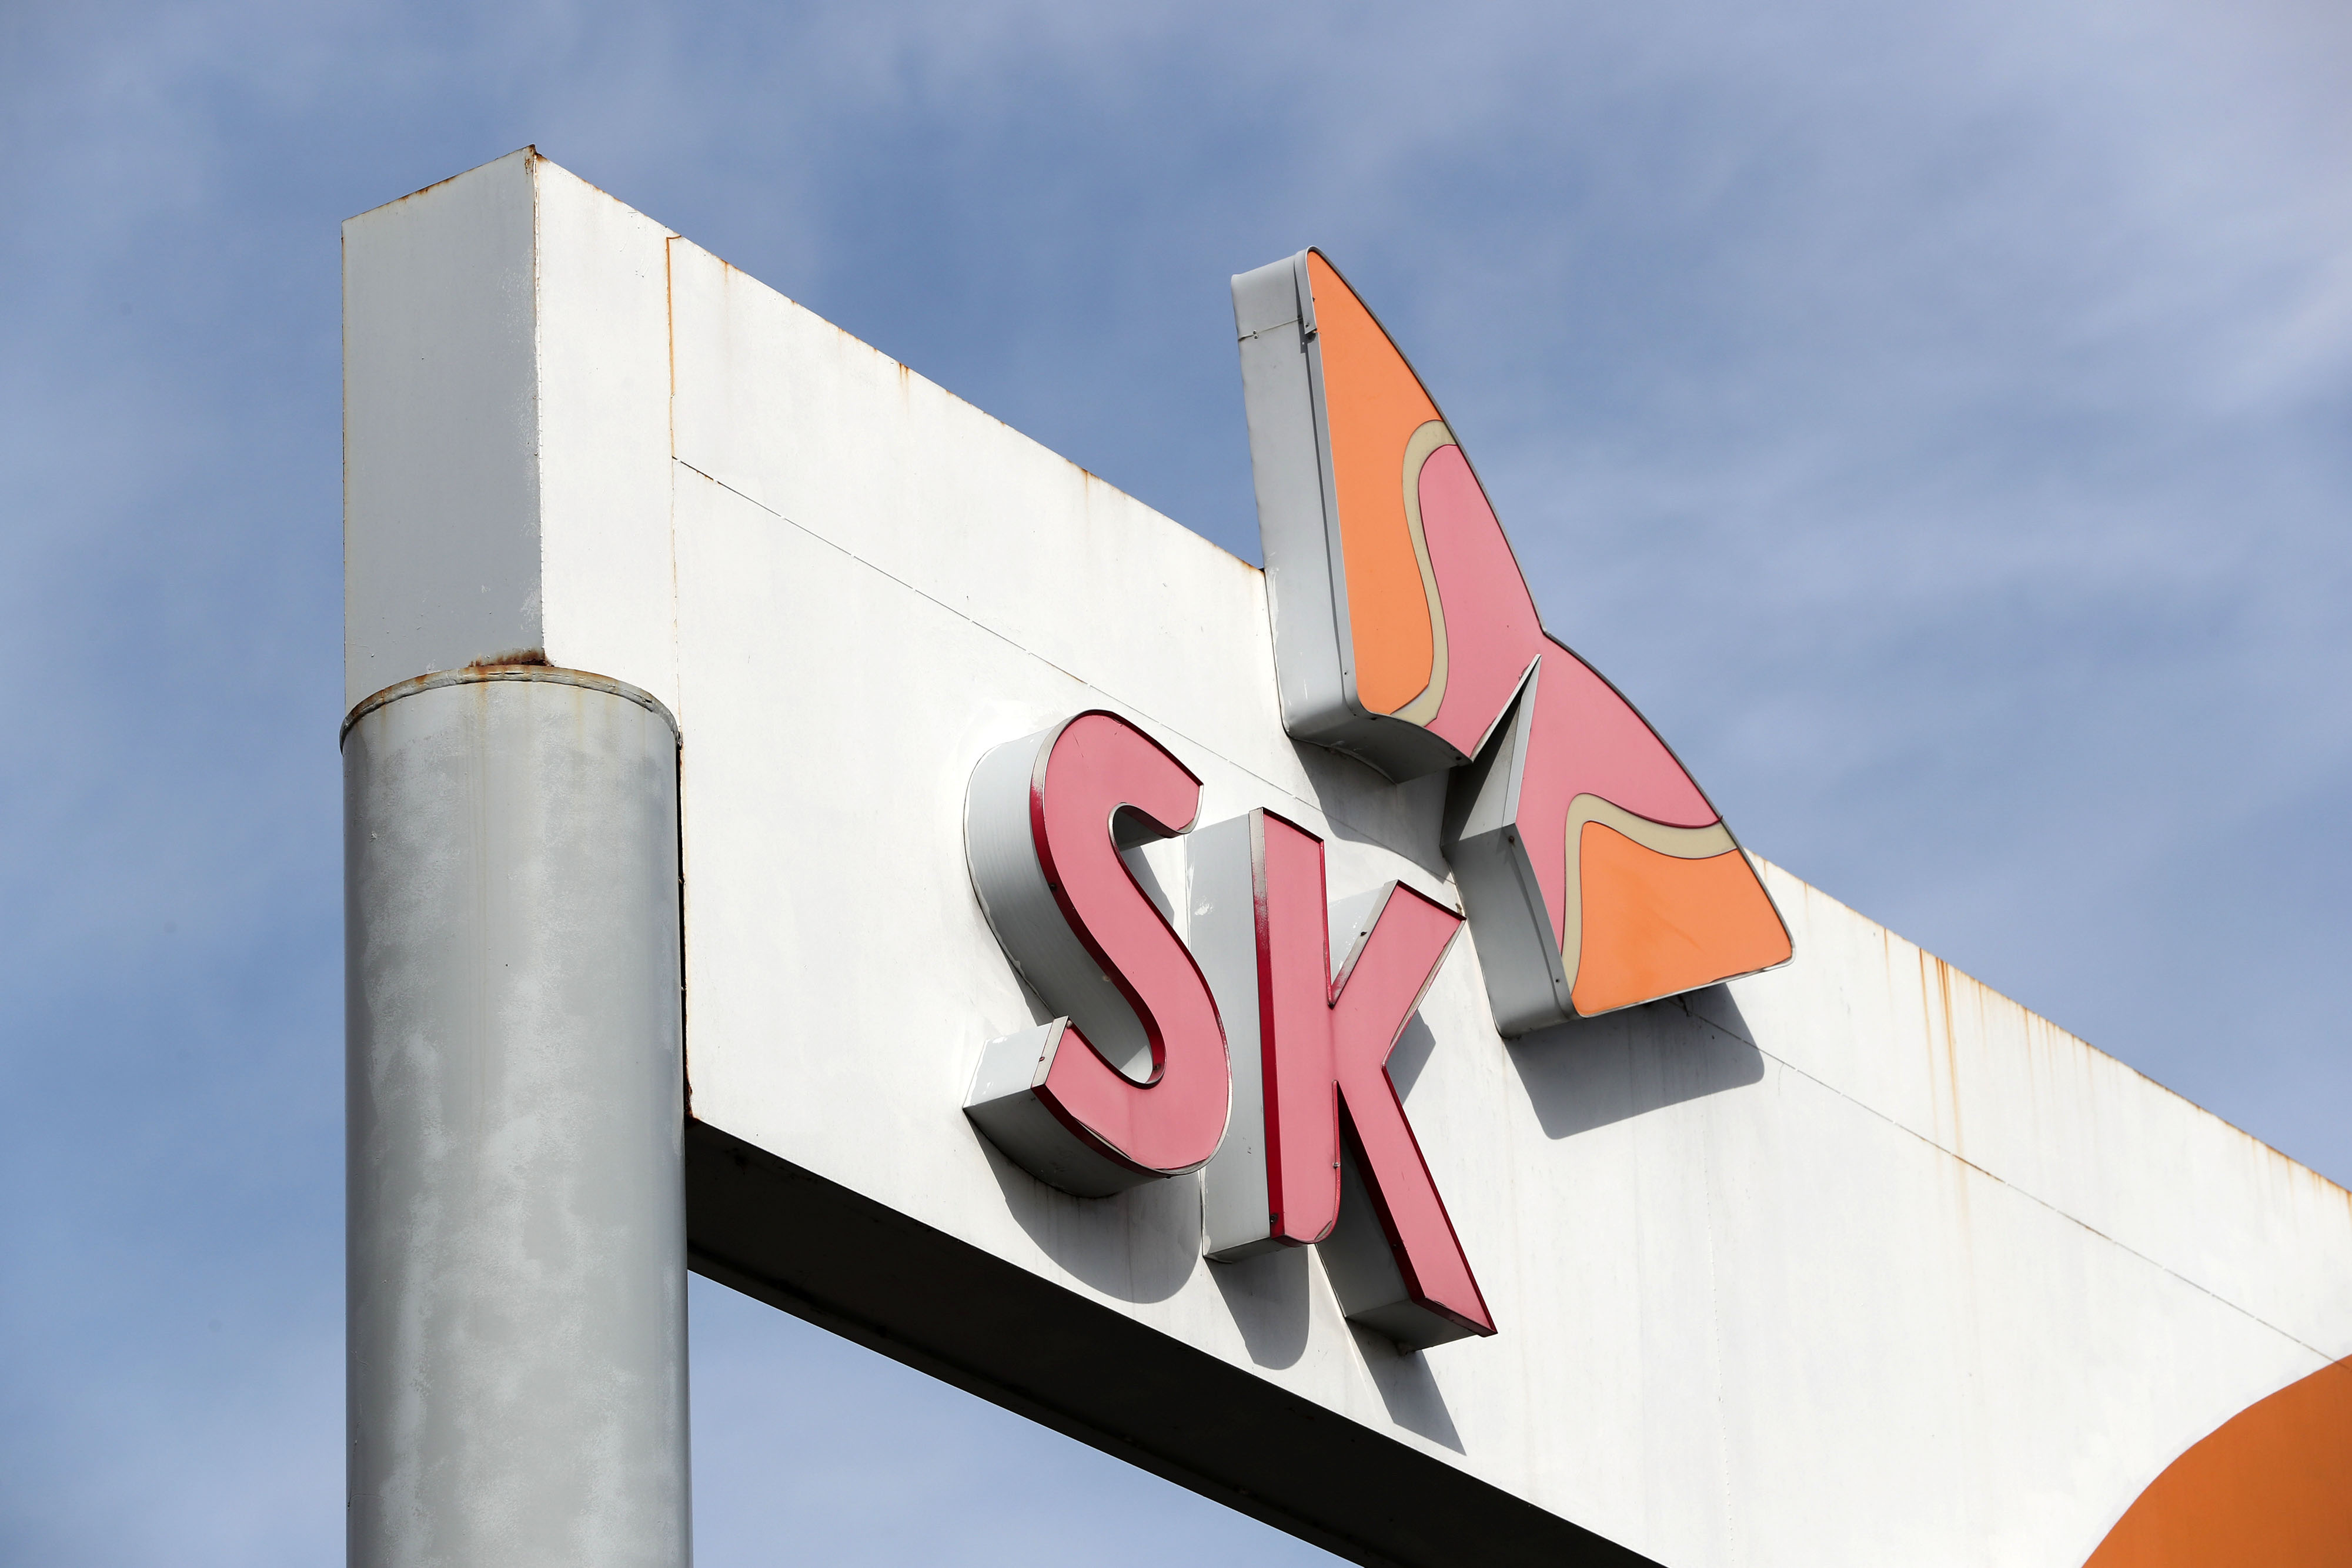 Views Of A SK Innovations Gas Station As Company Reports 4Q Earnings Result